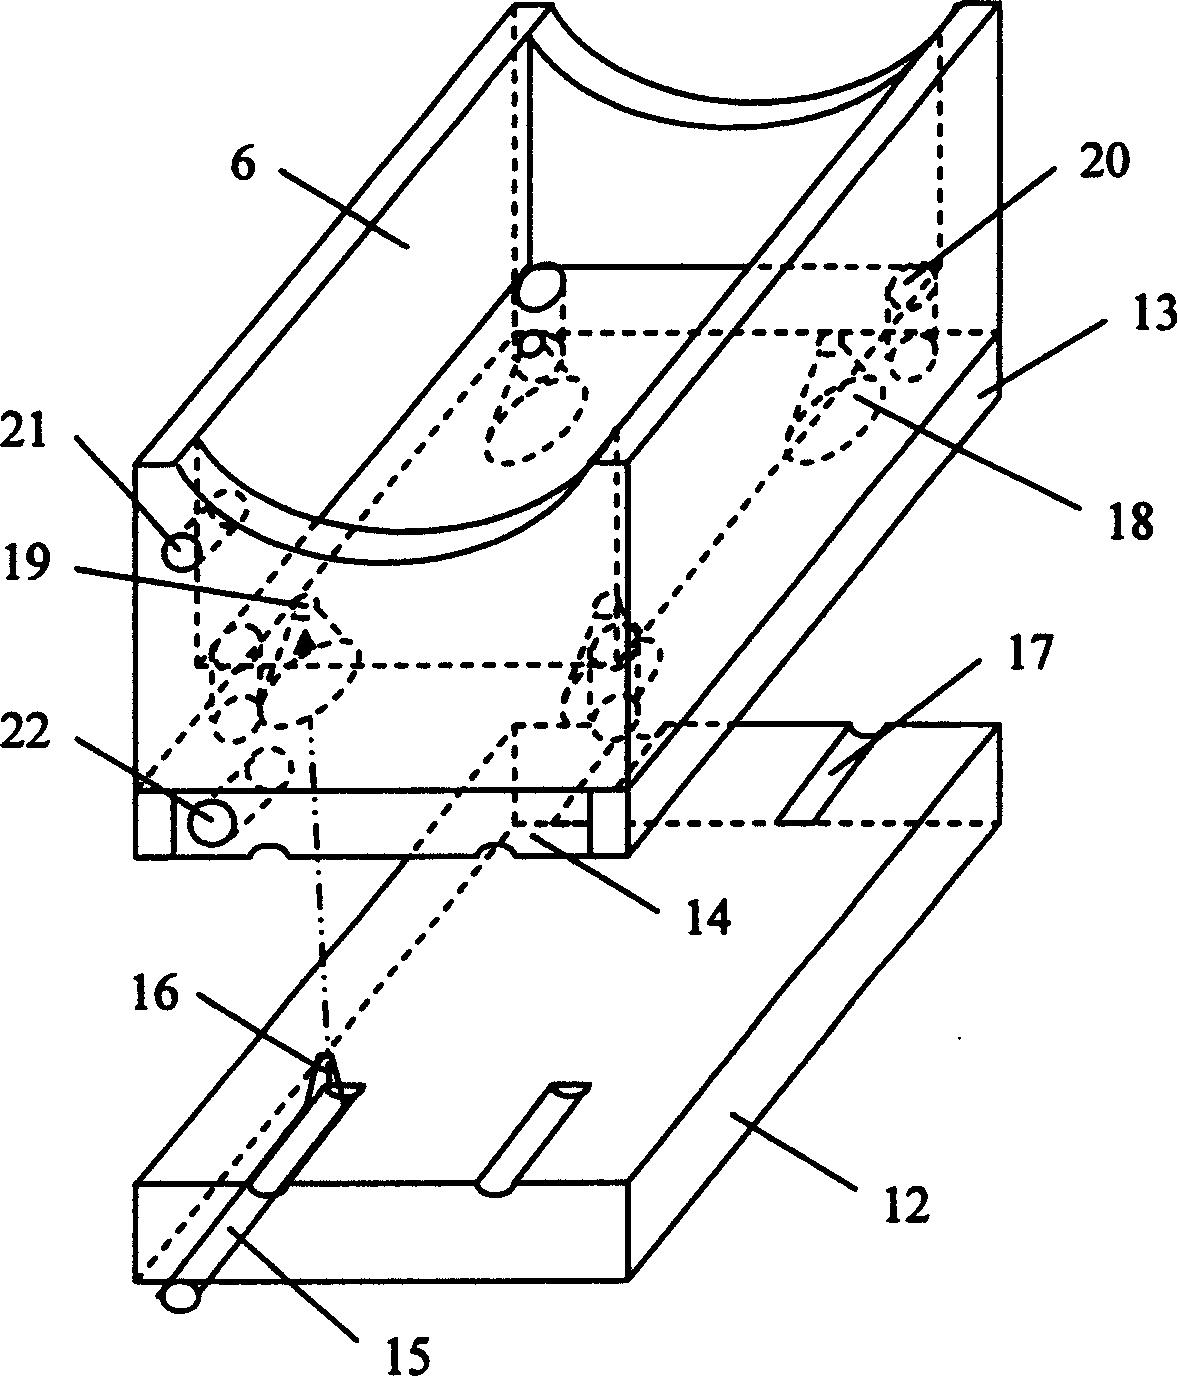 Robot tactile sense reproduction method based on water jet stimulation and apparatus therefor